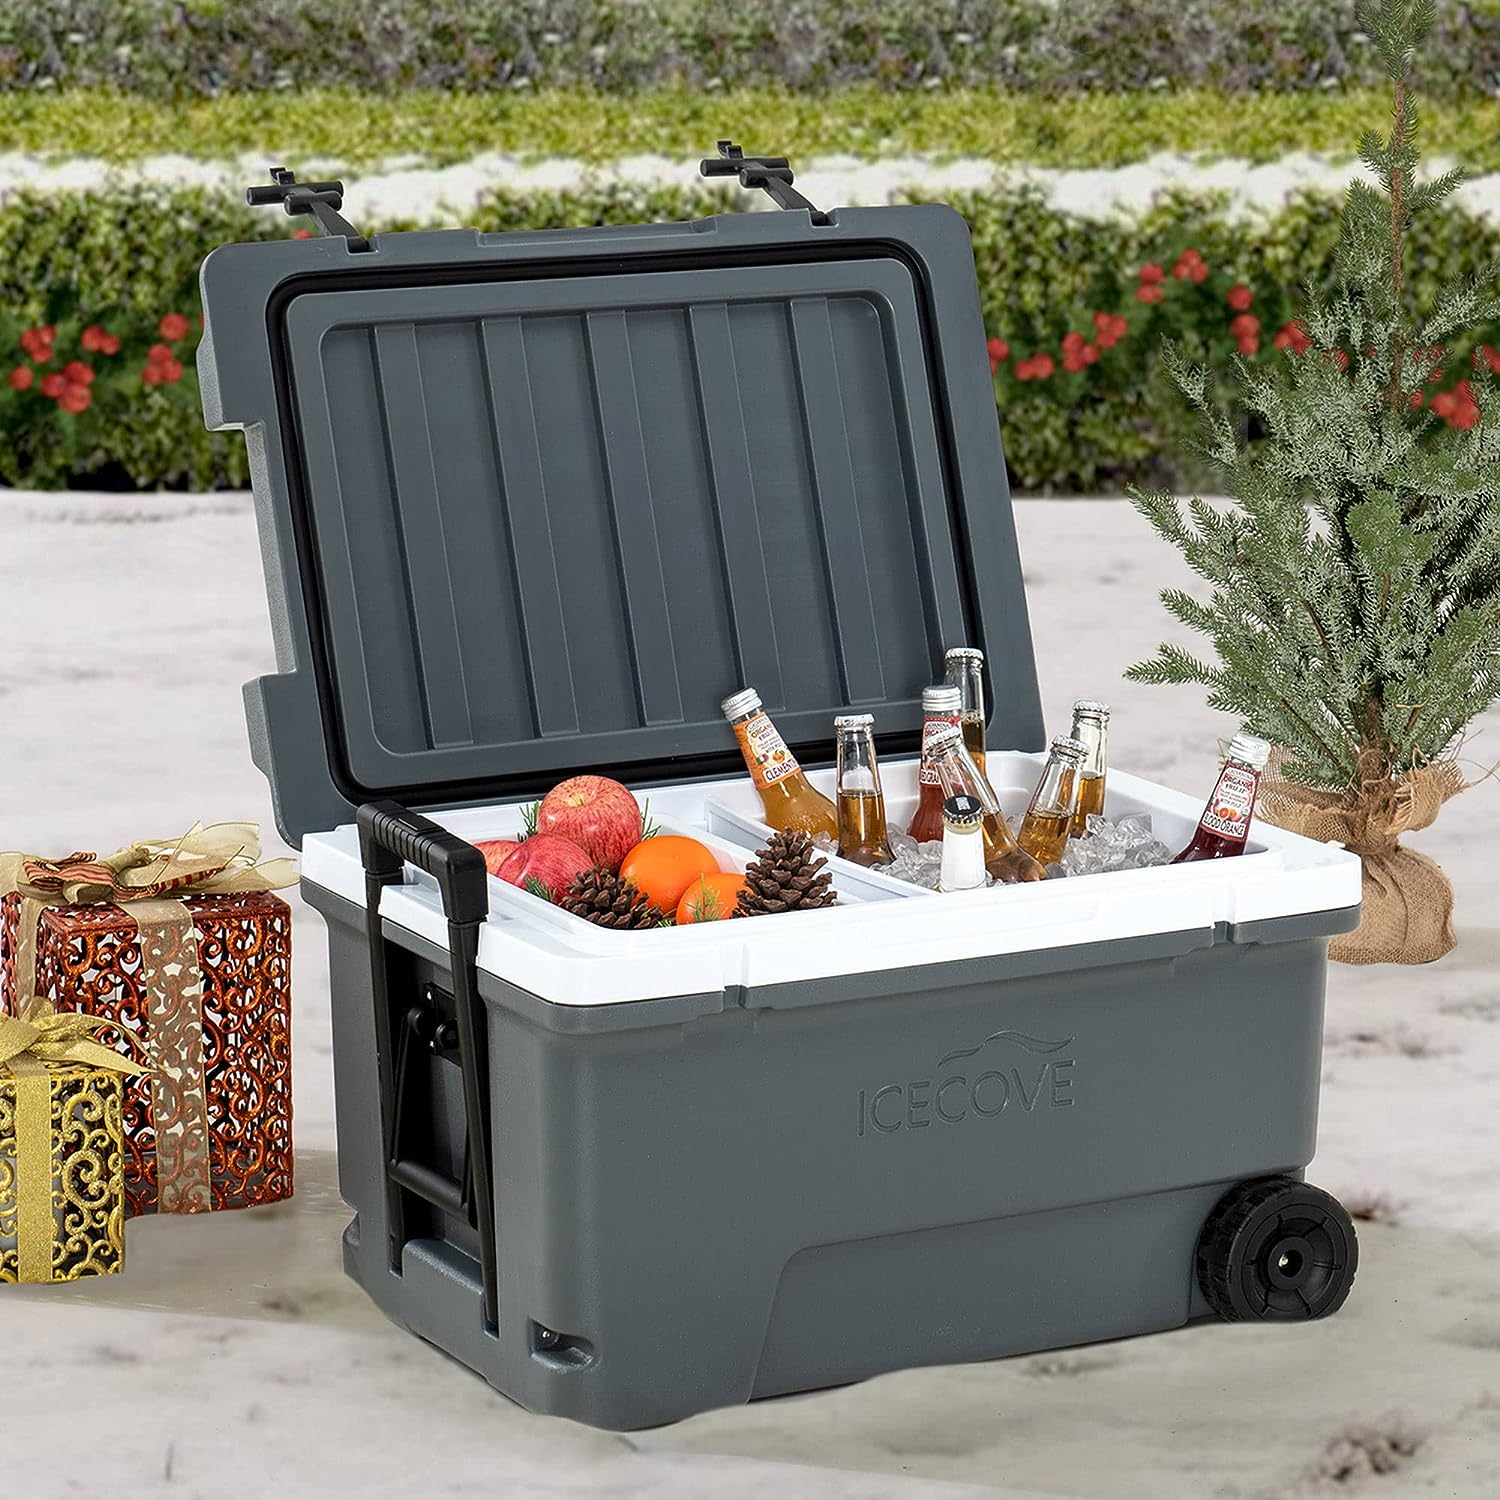 Icecove Ice Cooler For Outdoor